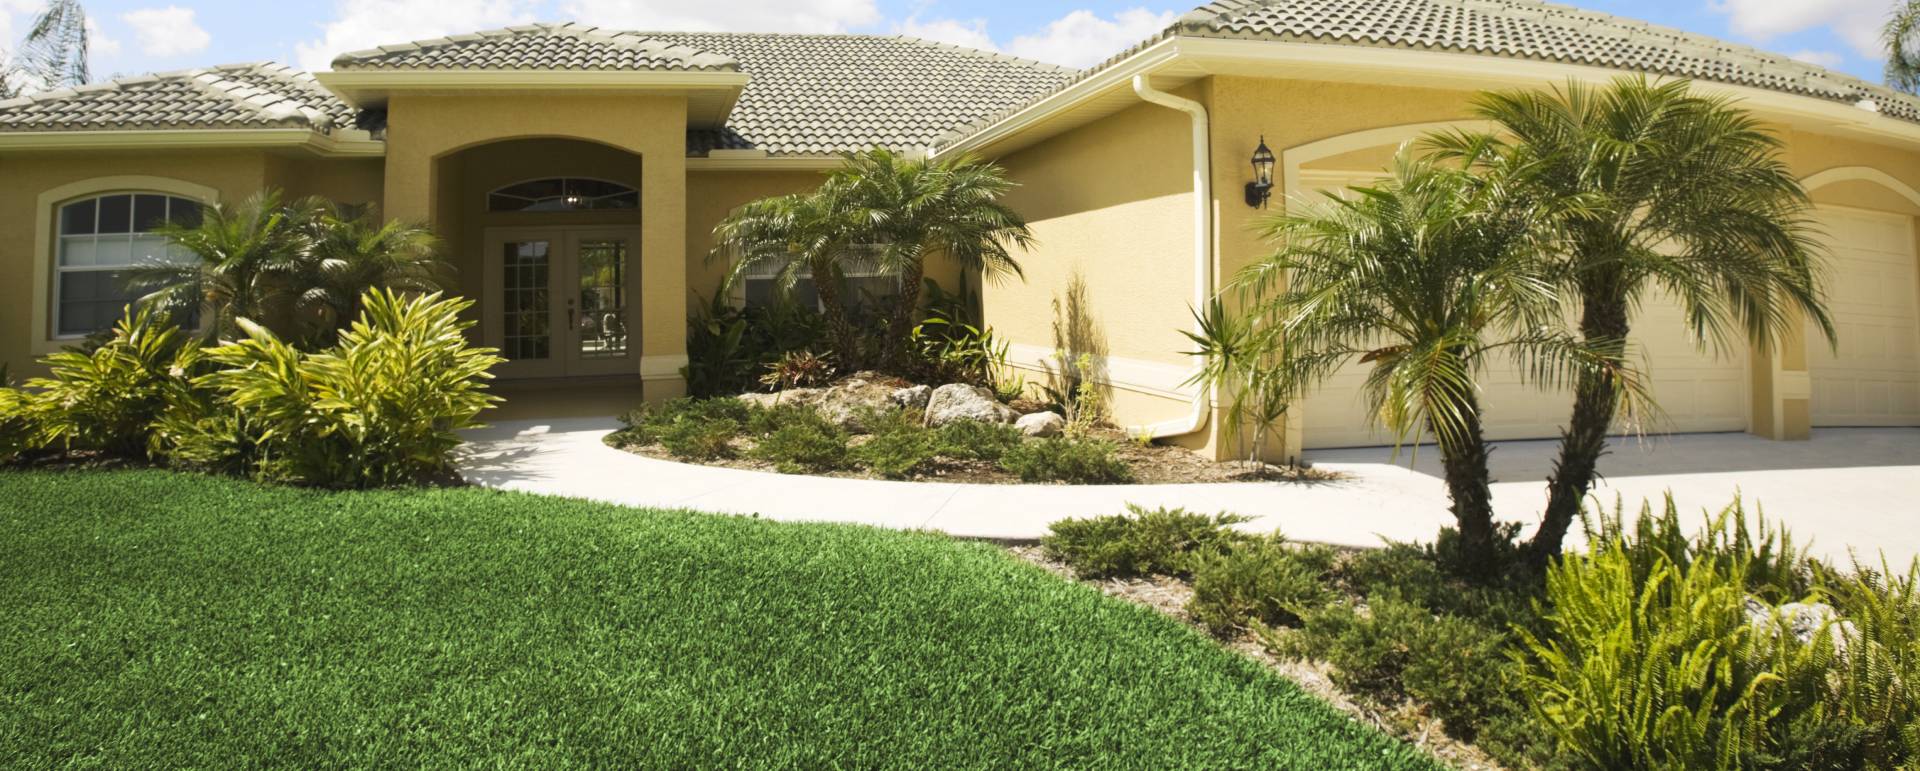 A healthy lawn in Central FL - Heron Home & Outdoor